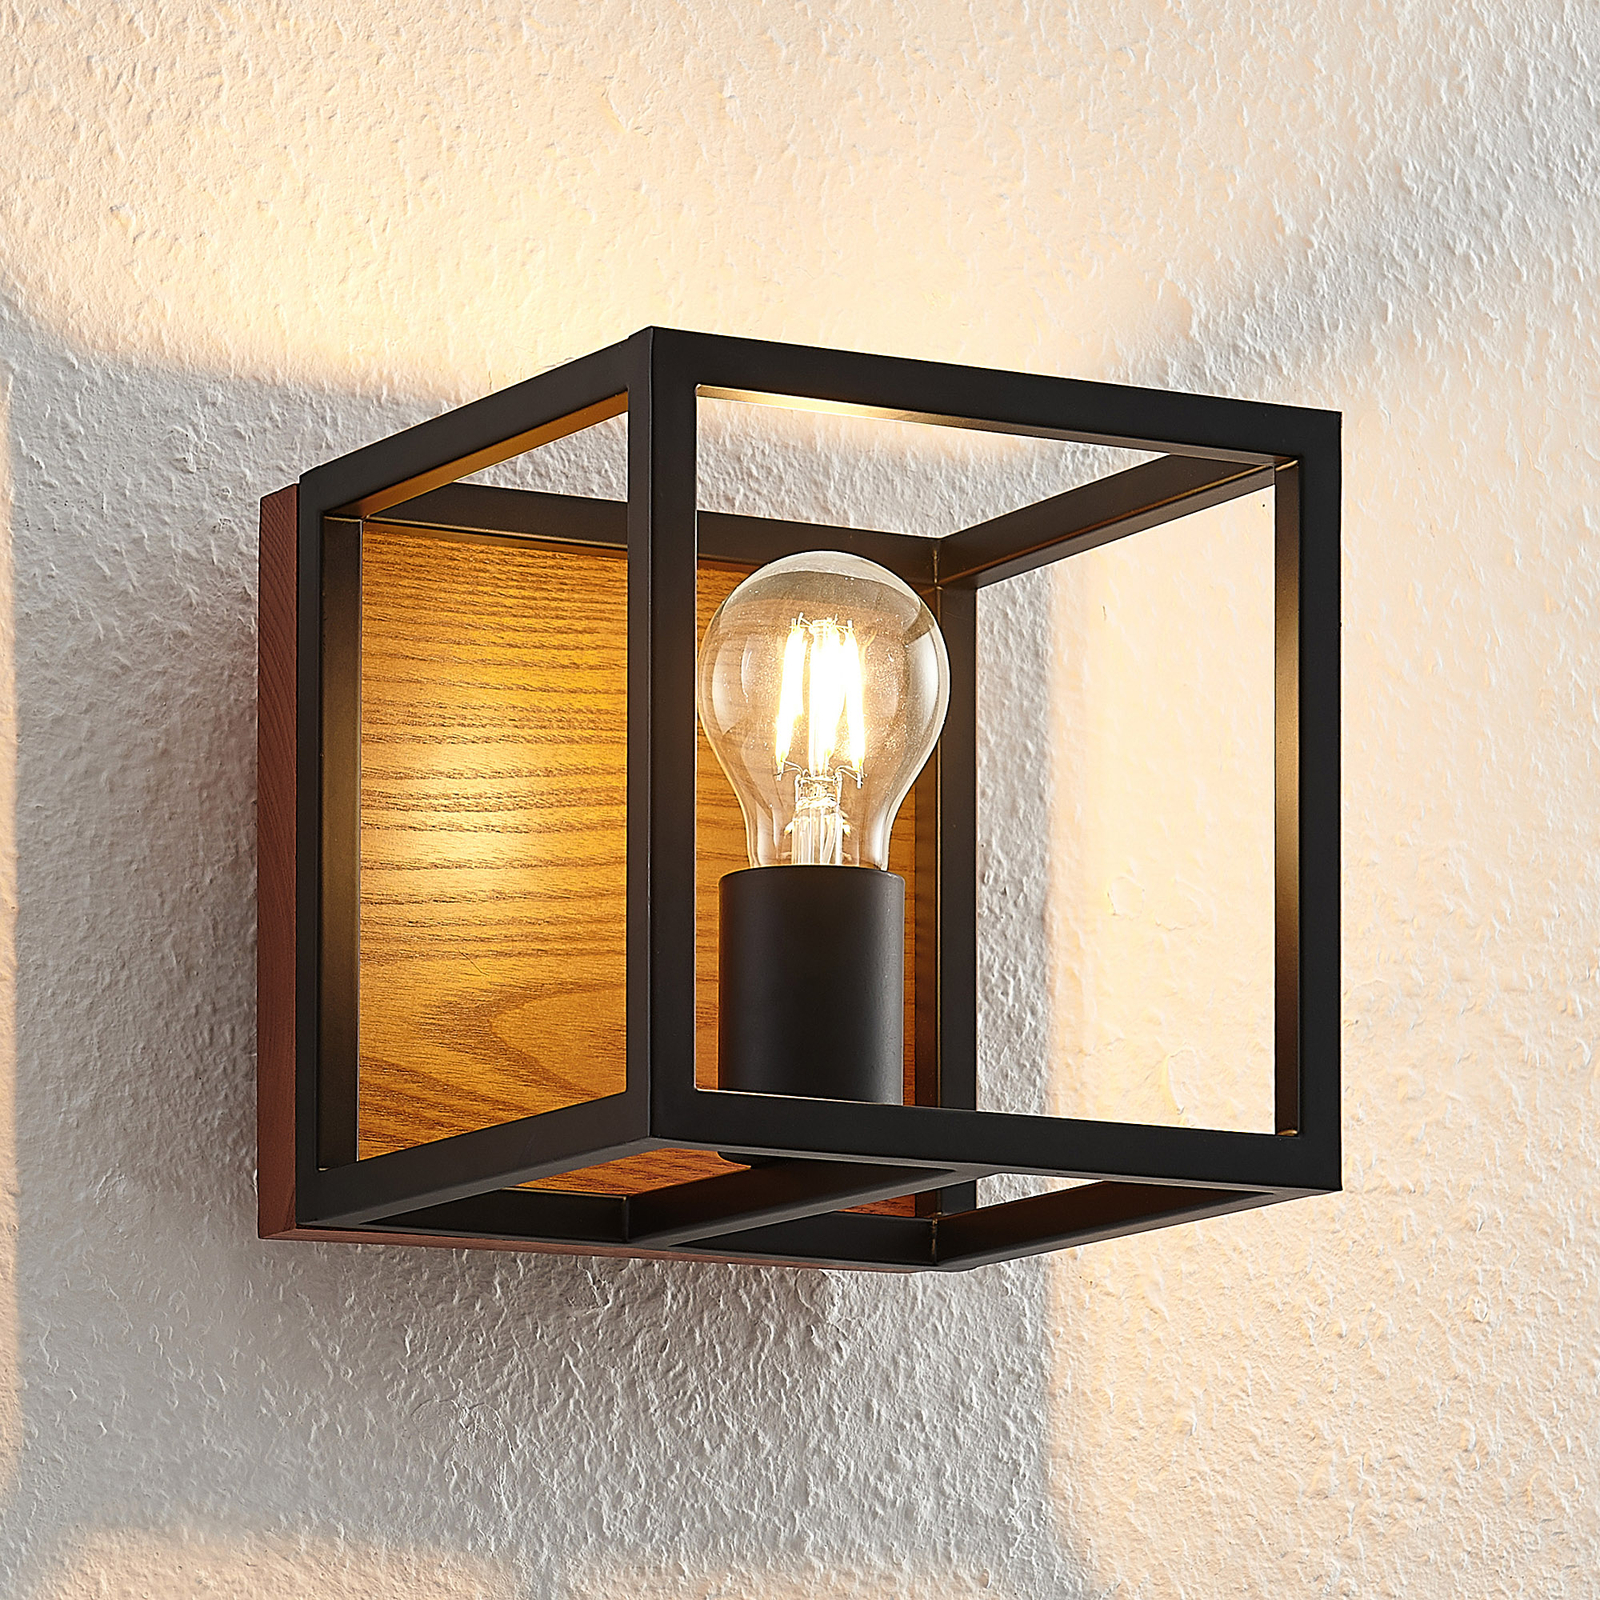 Lindby Miravi wall light with a wooden element